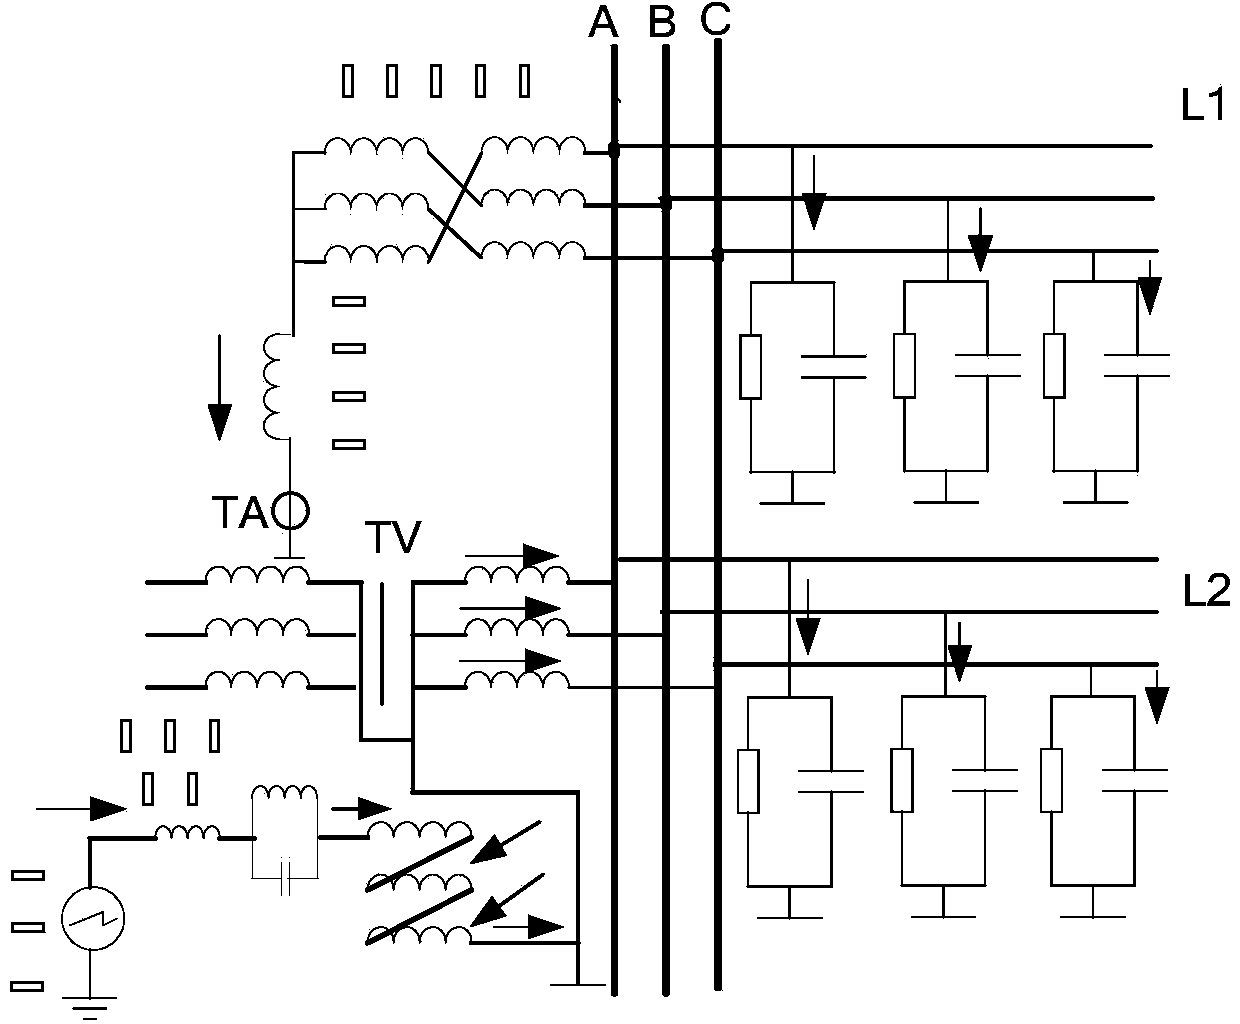 Power distribution system equivalent ground distributed capacitor measuring method